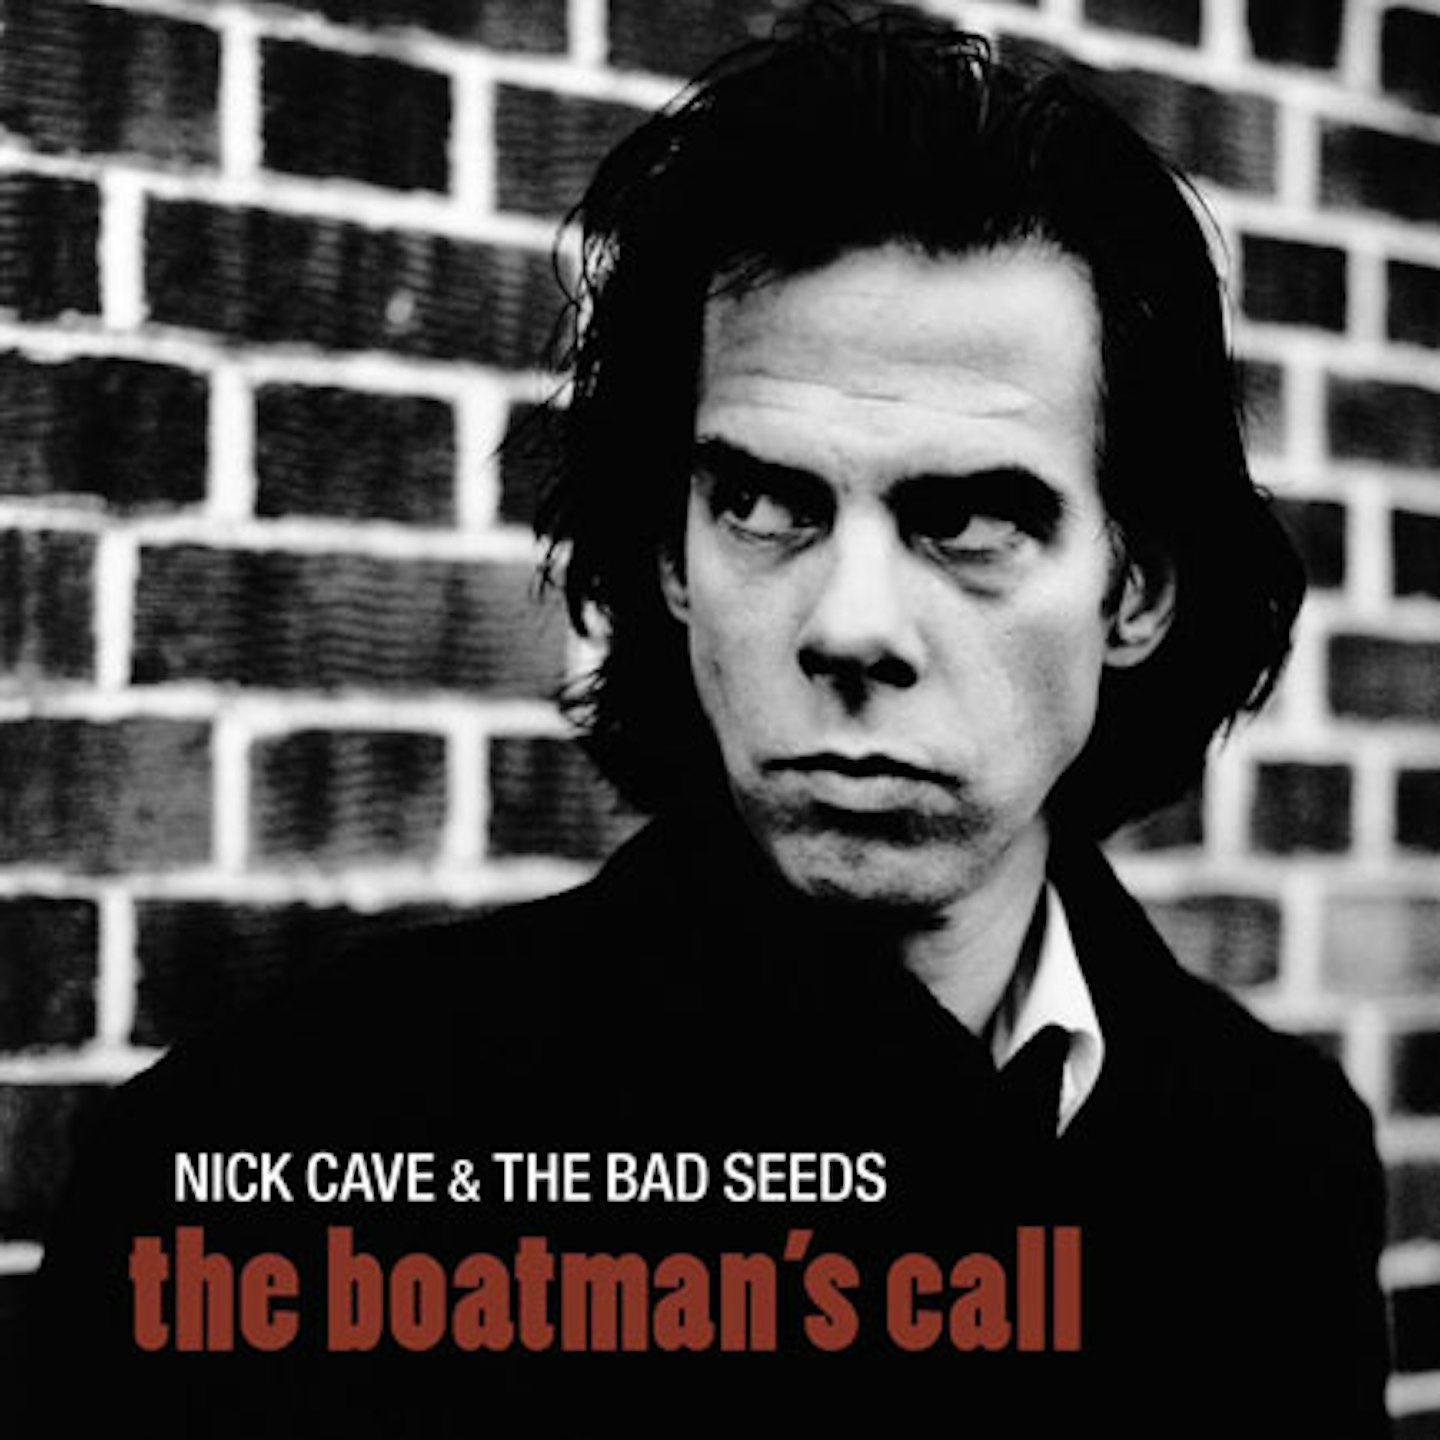 1. The Boatman's Call - Nick Cave & The Bad Seeds